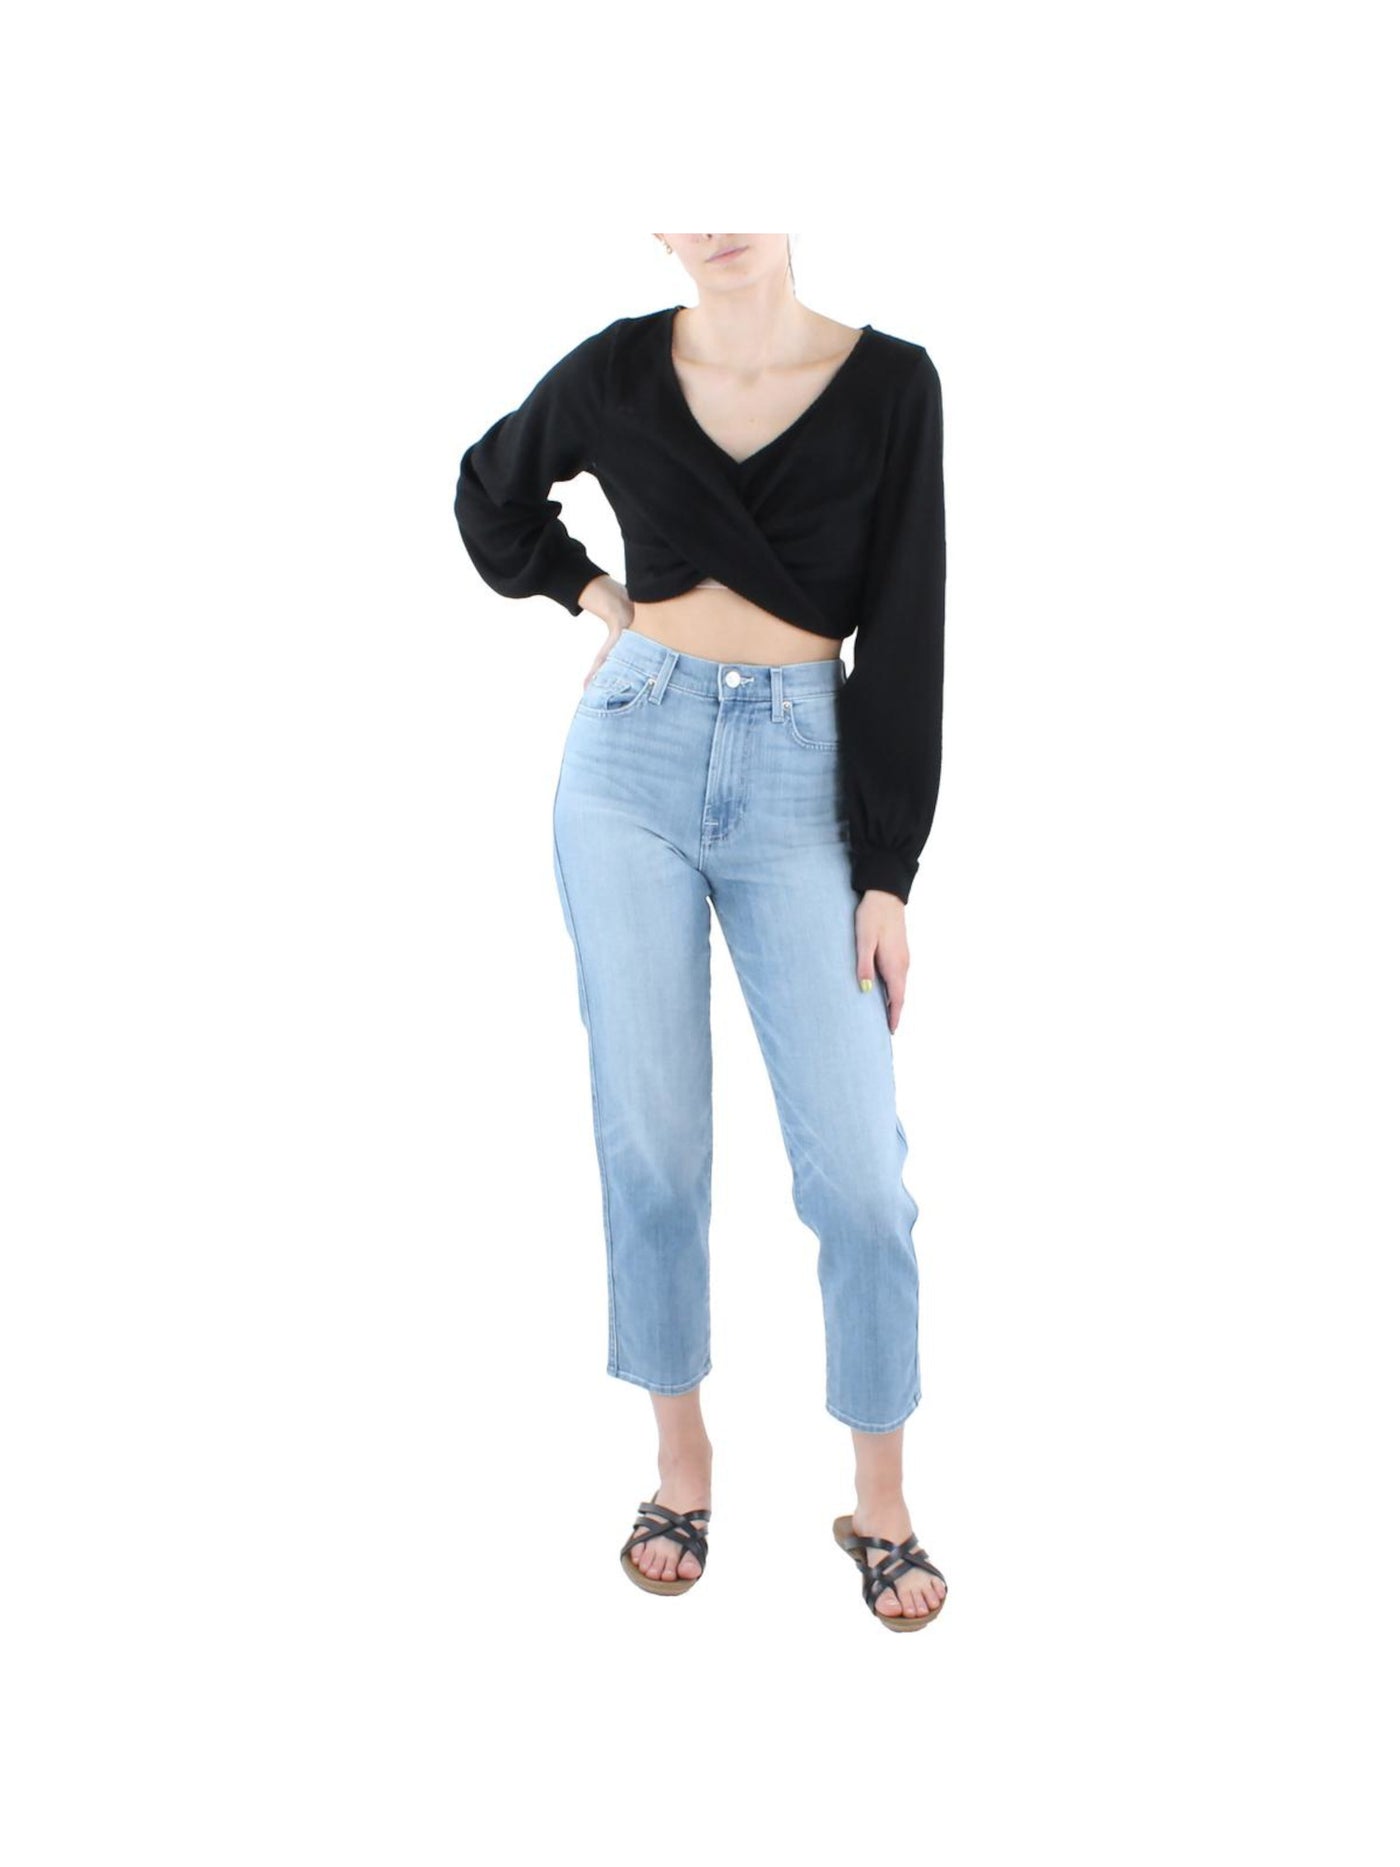 ALMOST FAMOUS Womens Black Ribbed Twist Front Long Sleeve V Neck Crop Top Sweater Juniors L